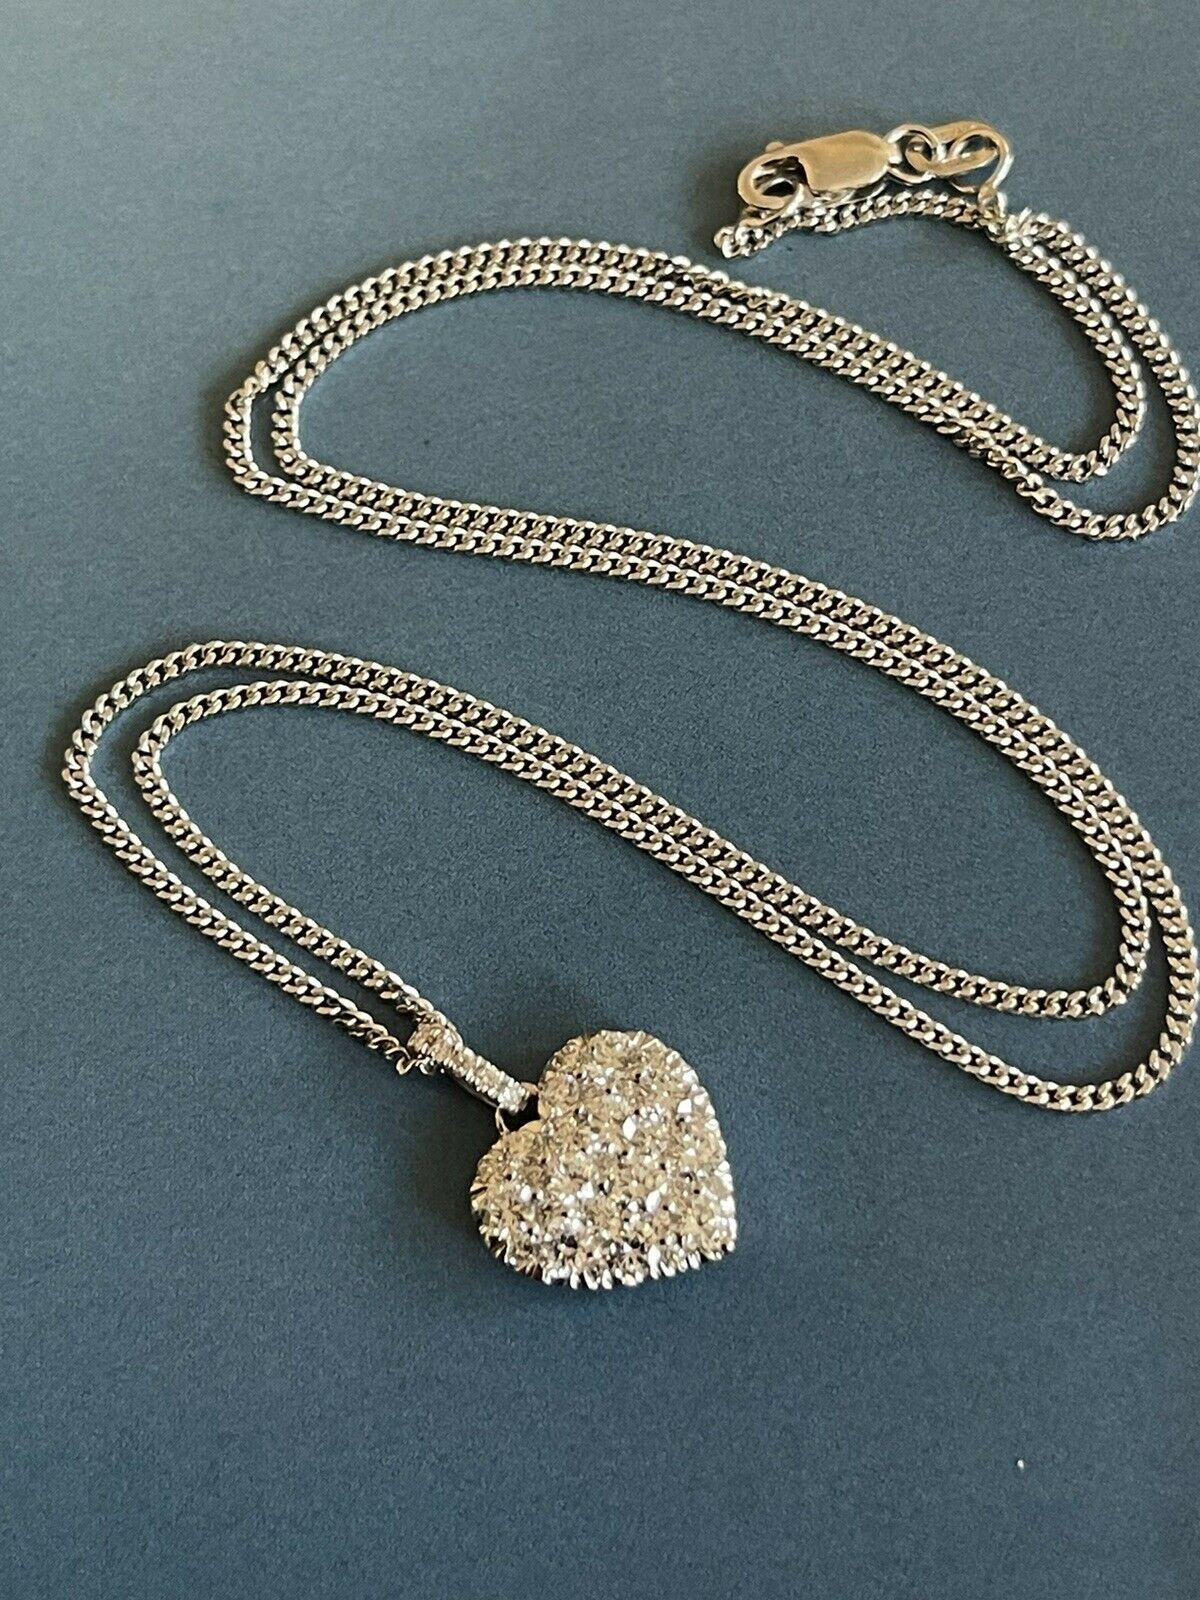 Women's 18ct White Gold Diamond Necklace 1ct Heart Pendant 18” Hallmarked VS One Carat For Sale